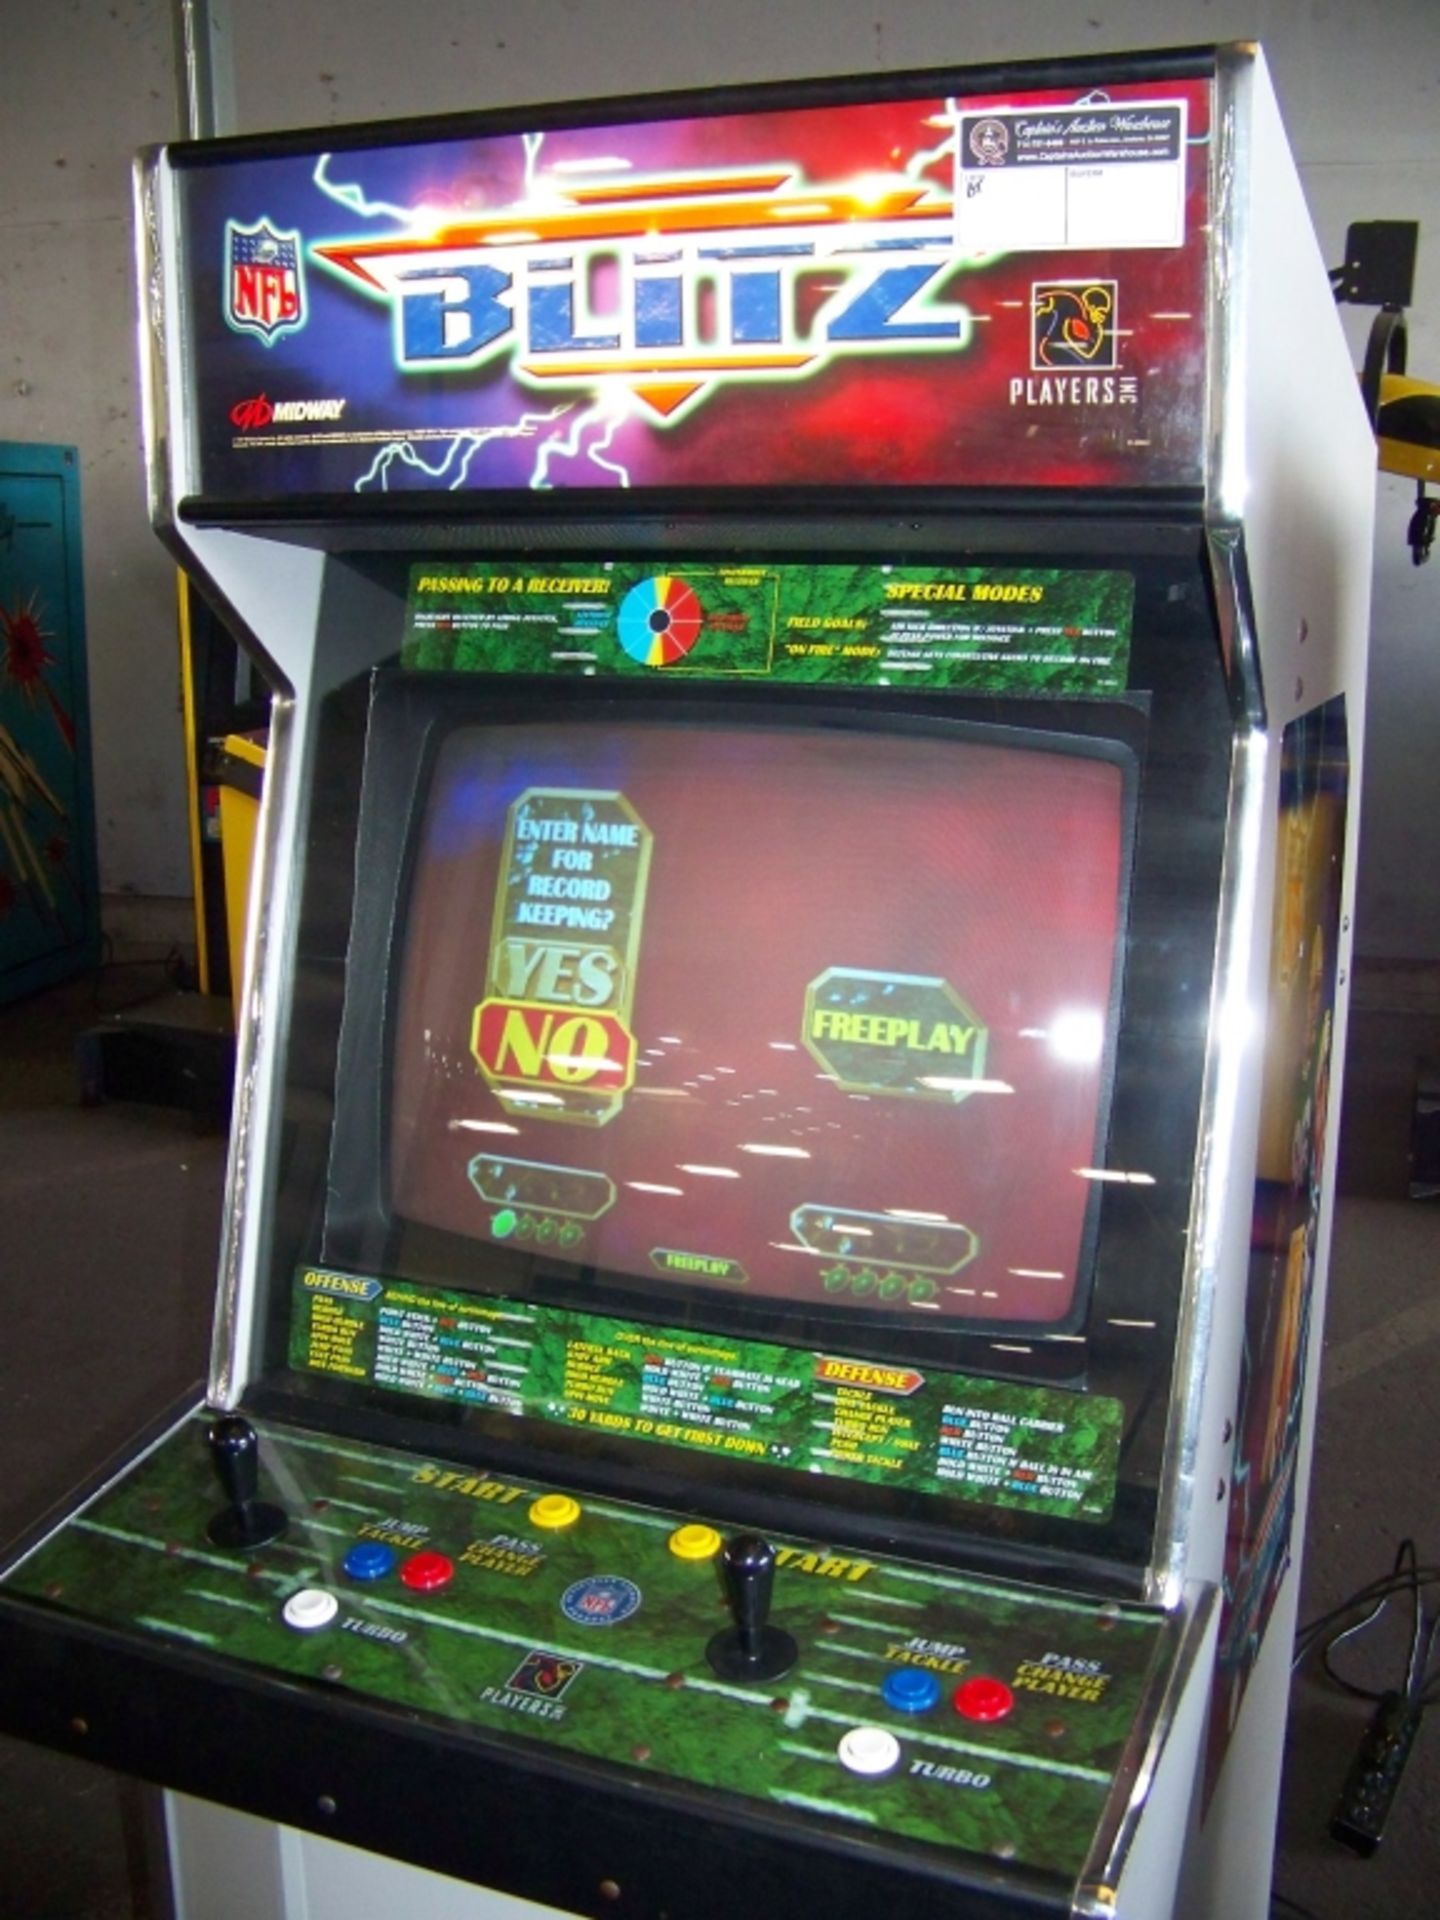 BLITZ FOOTBALL 2 PLAYER MIDWAY ARCADE GAME - Image 3 of 5